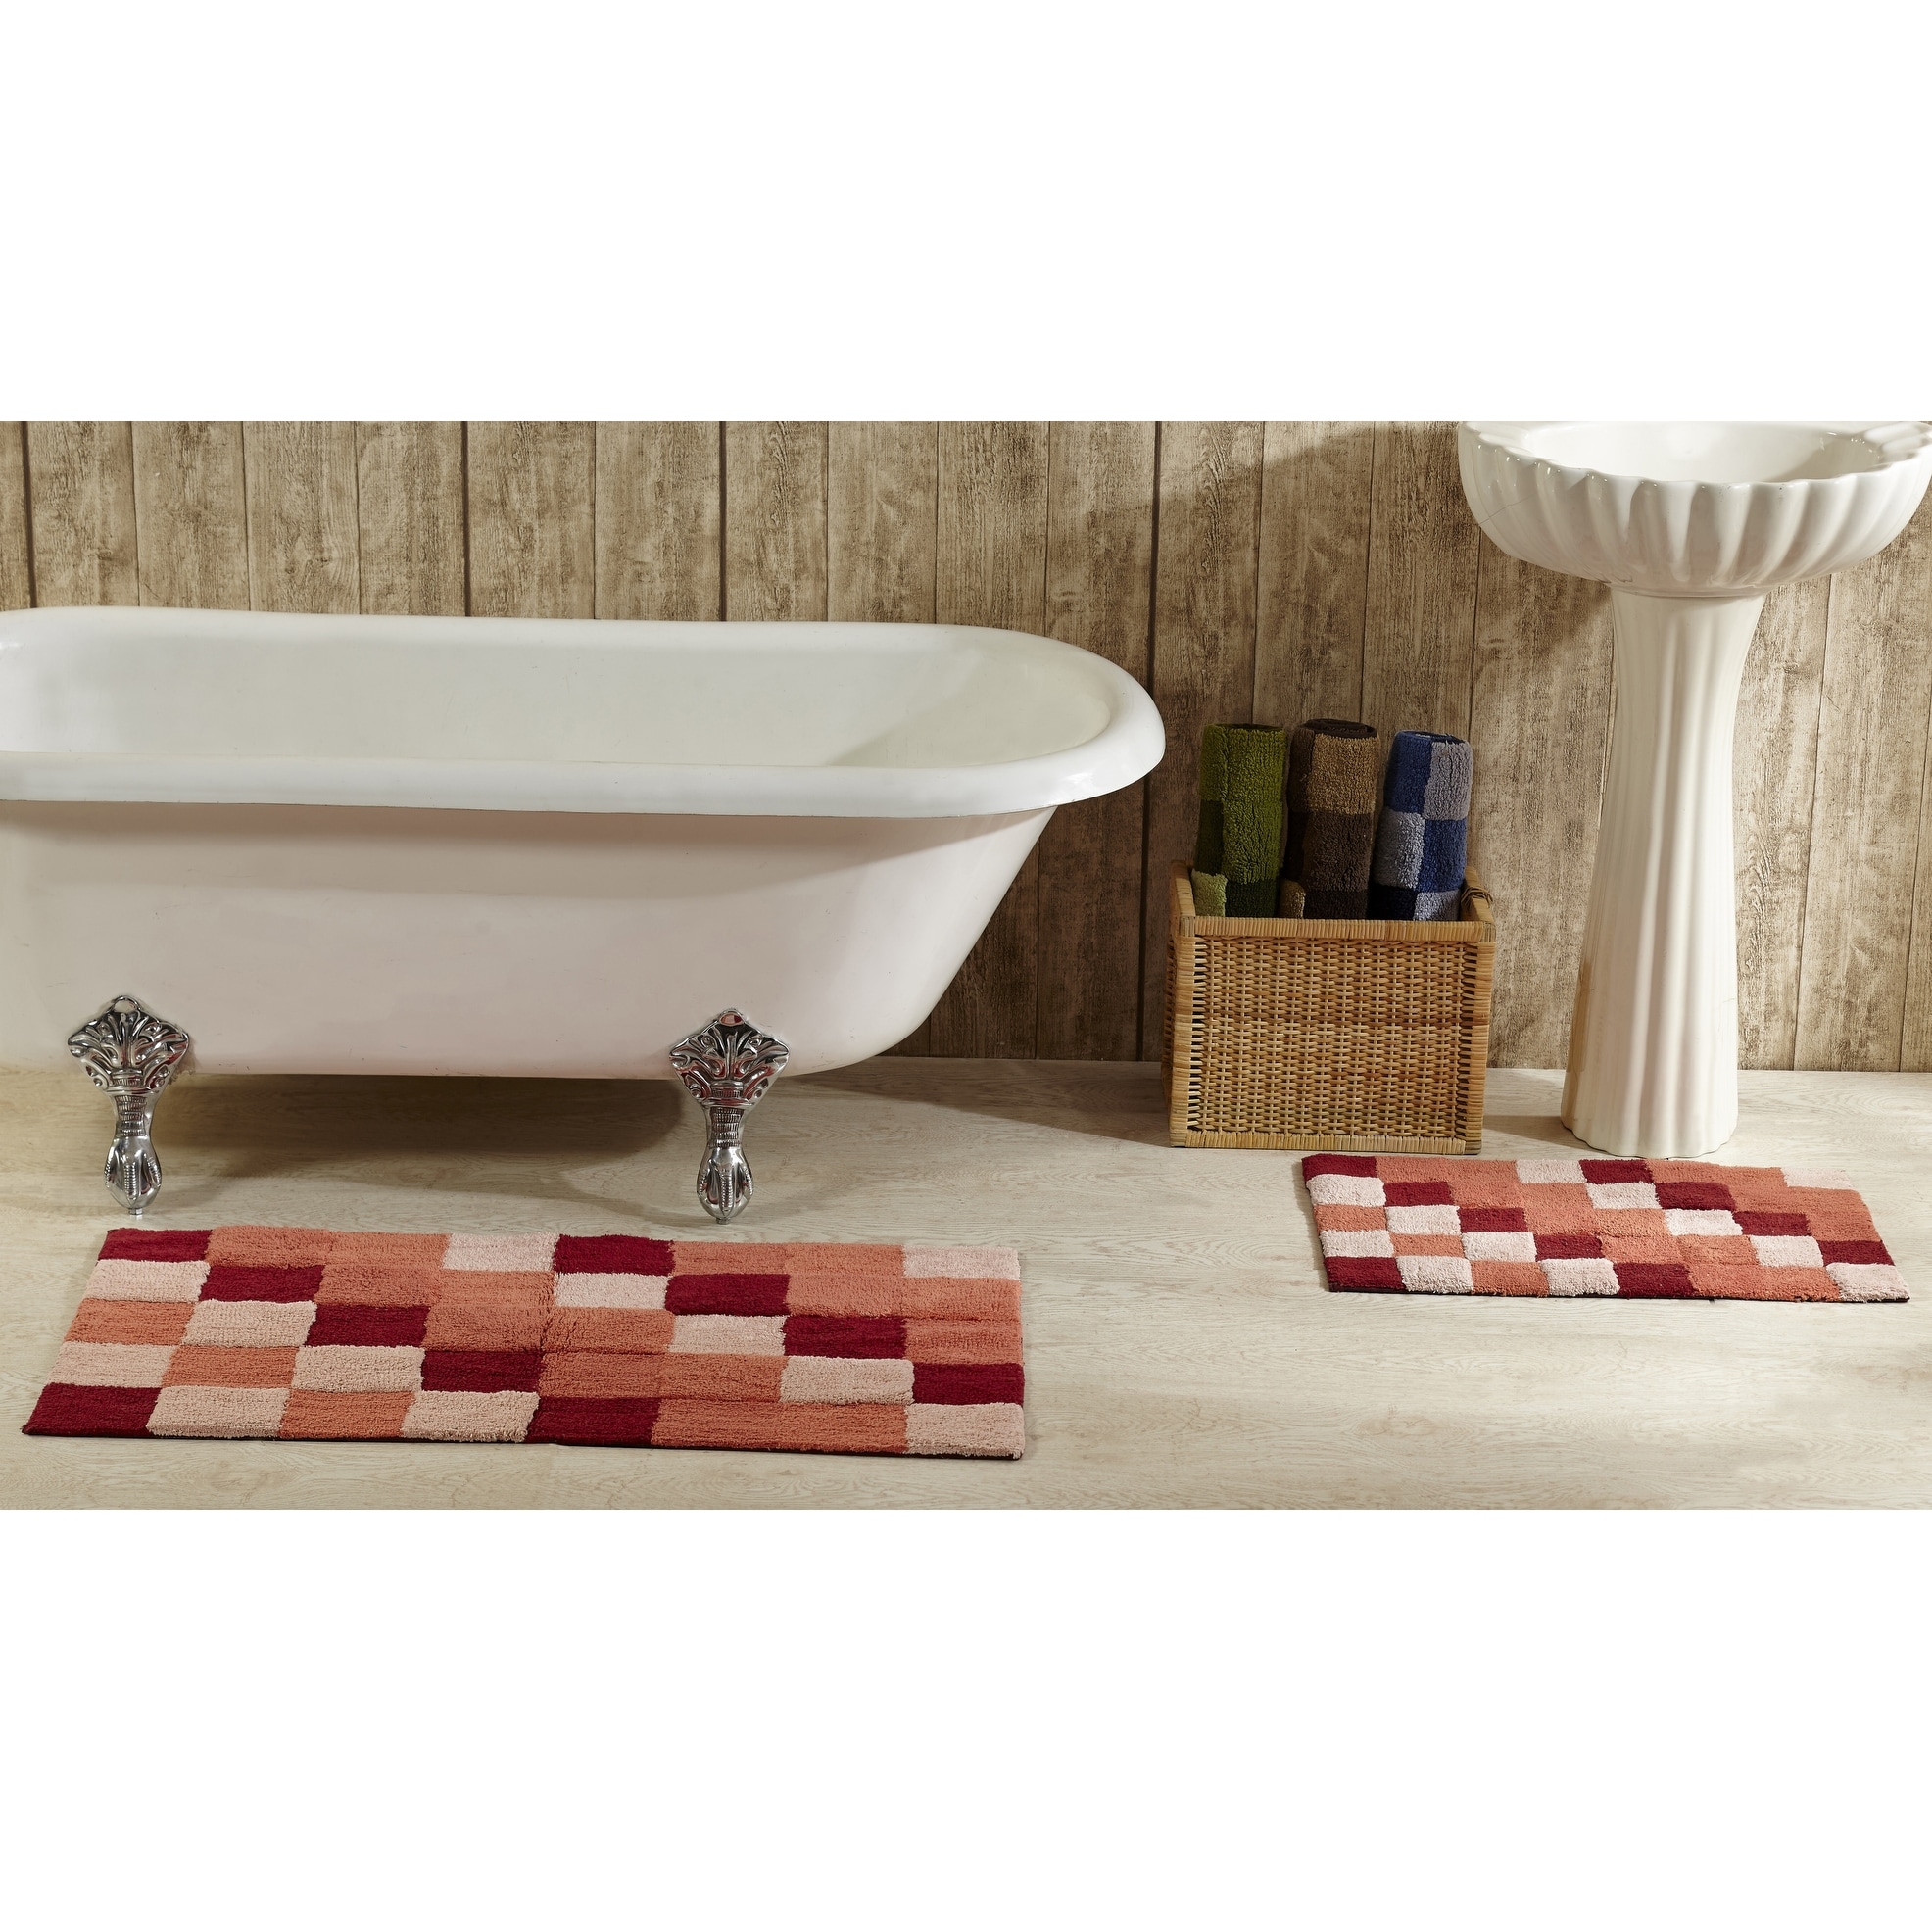 Better Trends Medallion Set 2pc Set Bath Rug 21-in x 34-in Beige/Natural  Cotton Bath Rug in the Bathroom Rugs & Mats department at